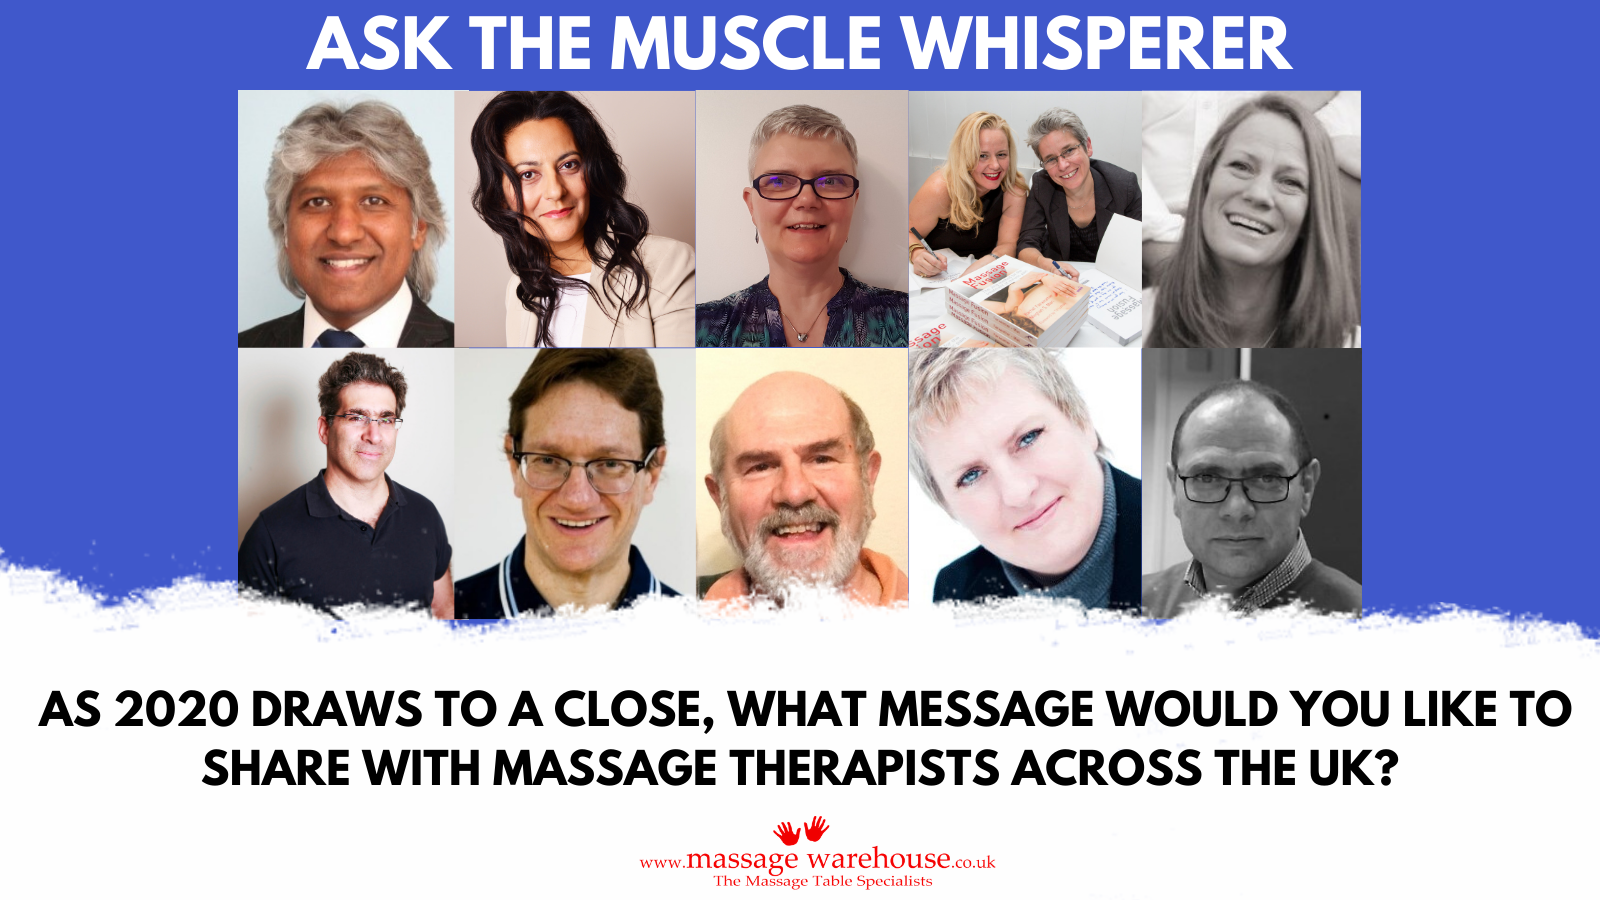 As 2020 draws to a close what message would you like to share with massage therapists across the UK? Ask the Muscle Whisperer series